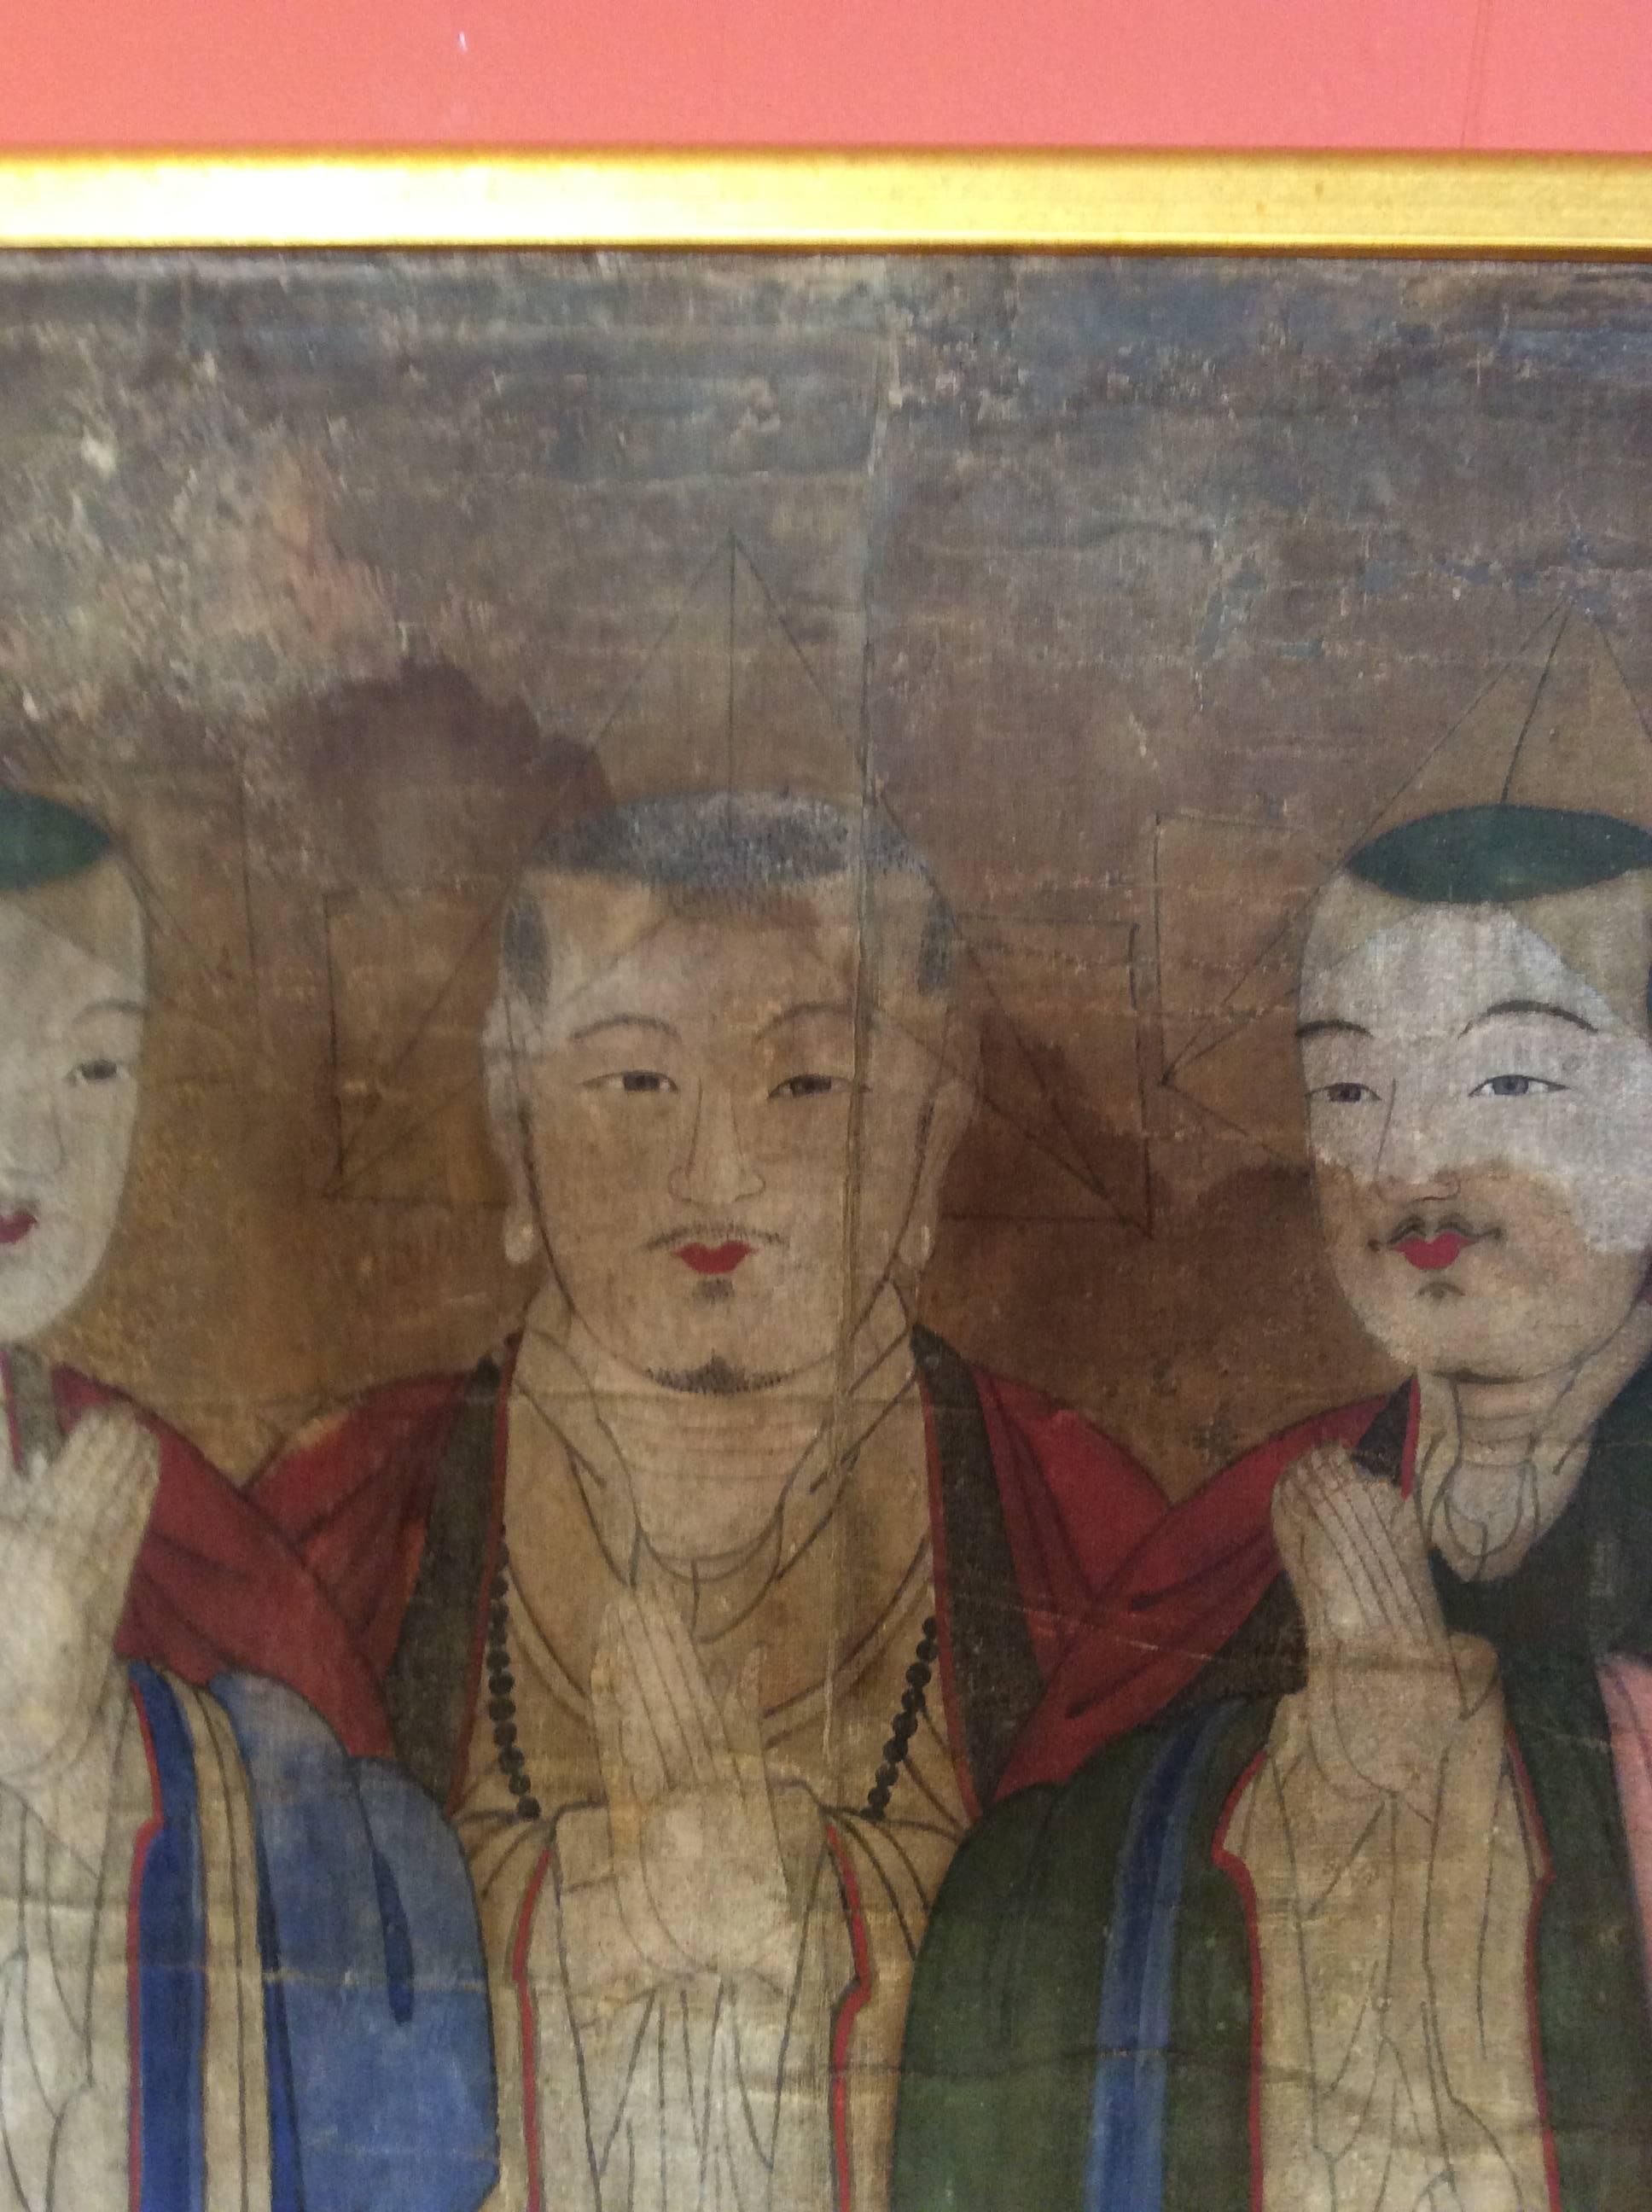 Antique Chinese painting of three figures on fabric. The painting is delicate, with great care given to the faces. 
There is some discoloration in the fabric. It has been framed and mounted in the last twenty years.